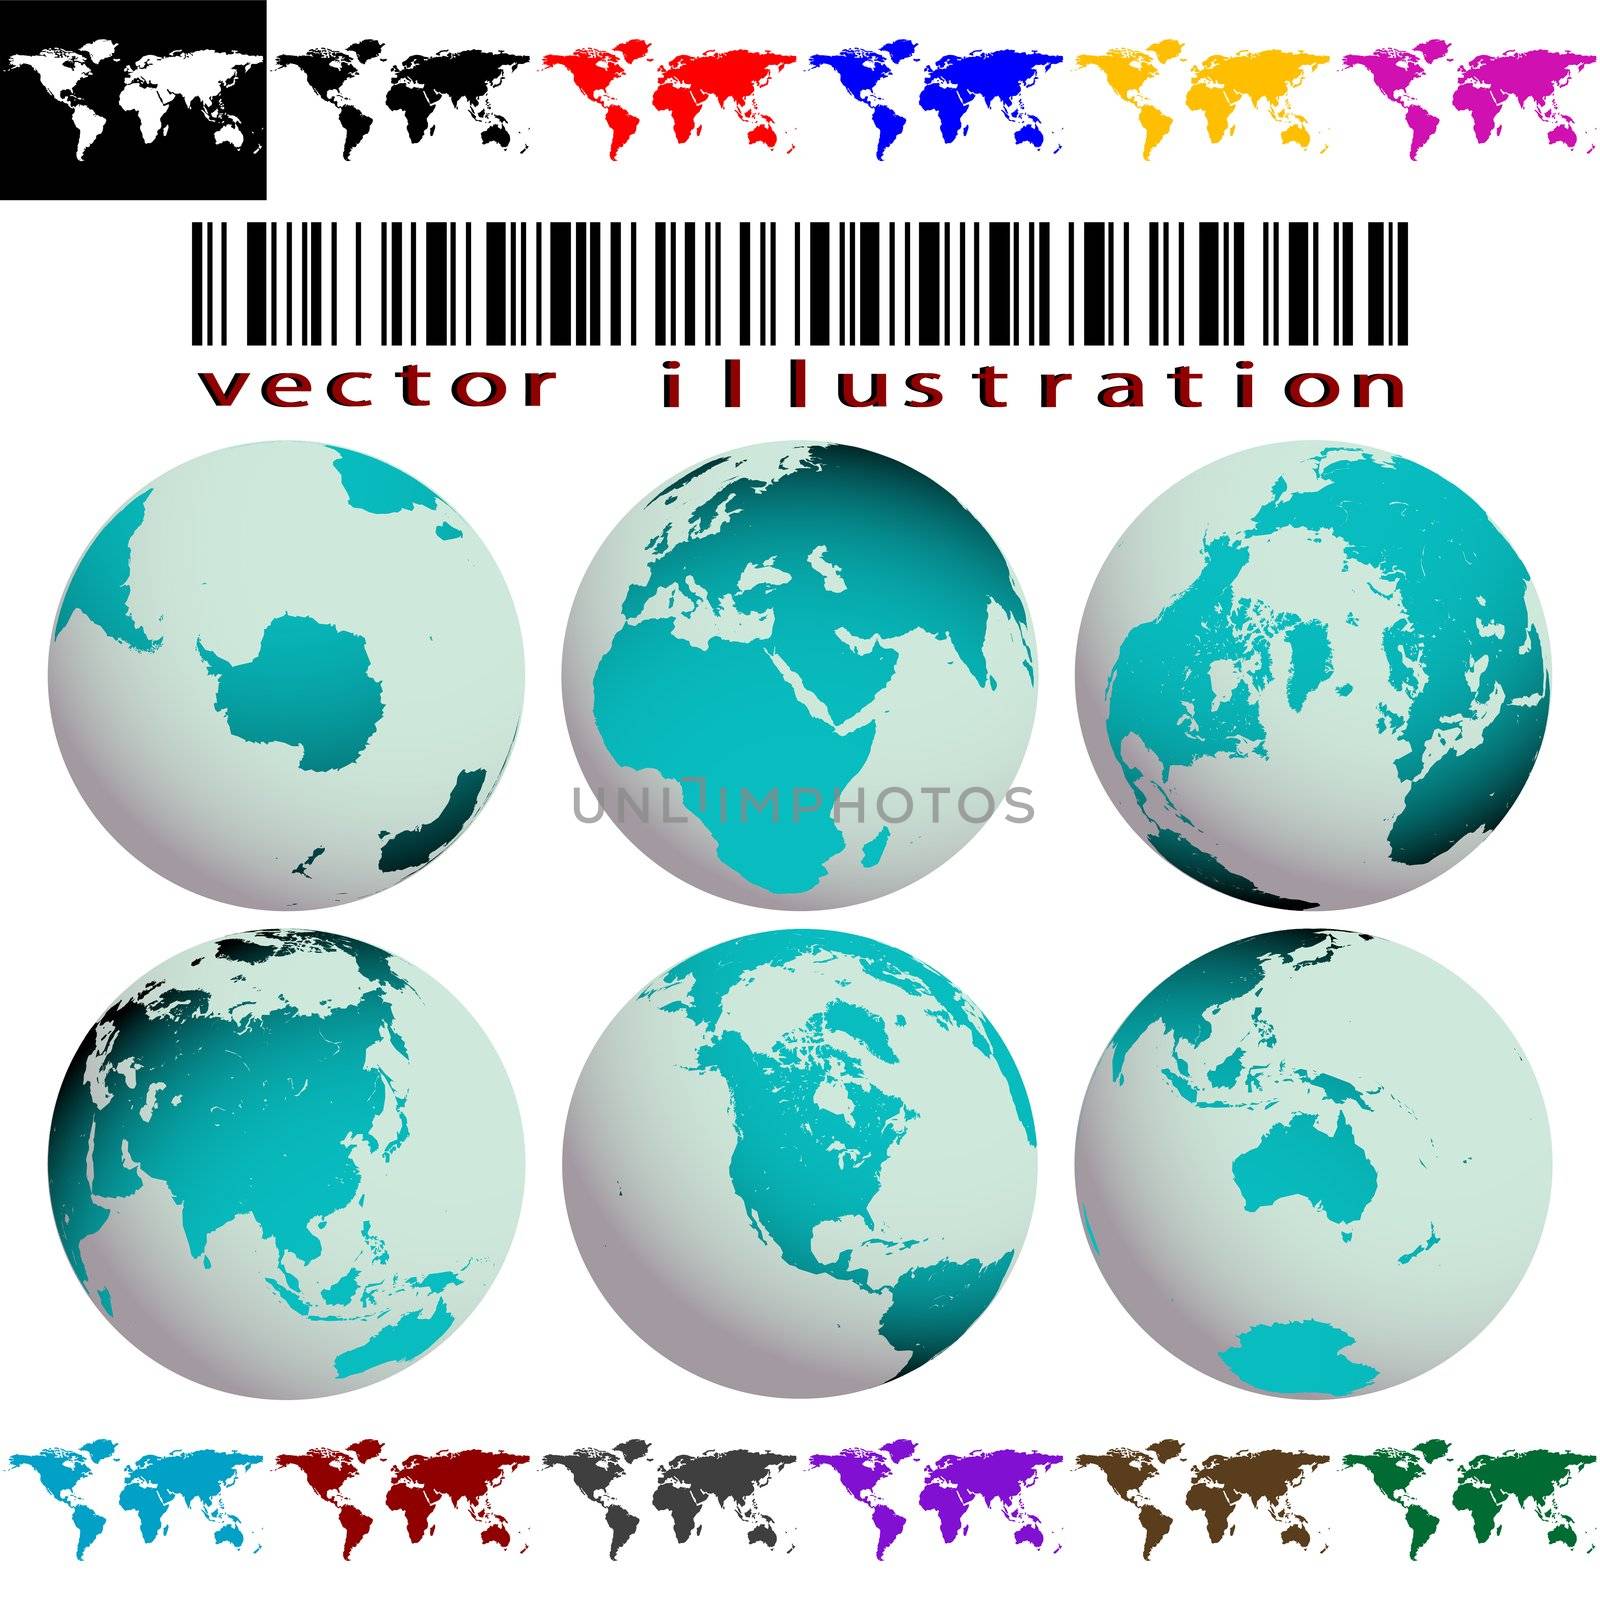 world maps and globes vector by robertosch